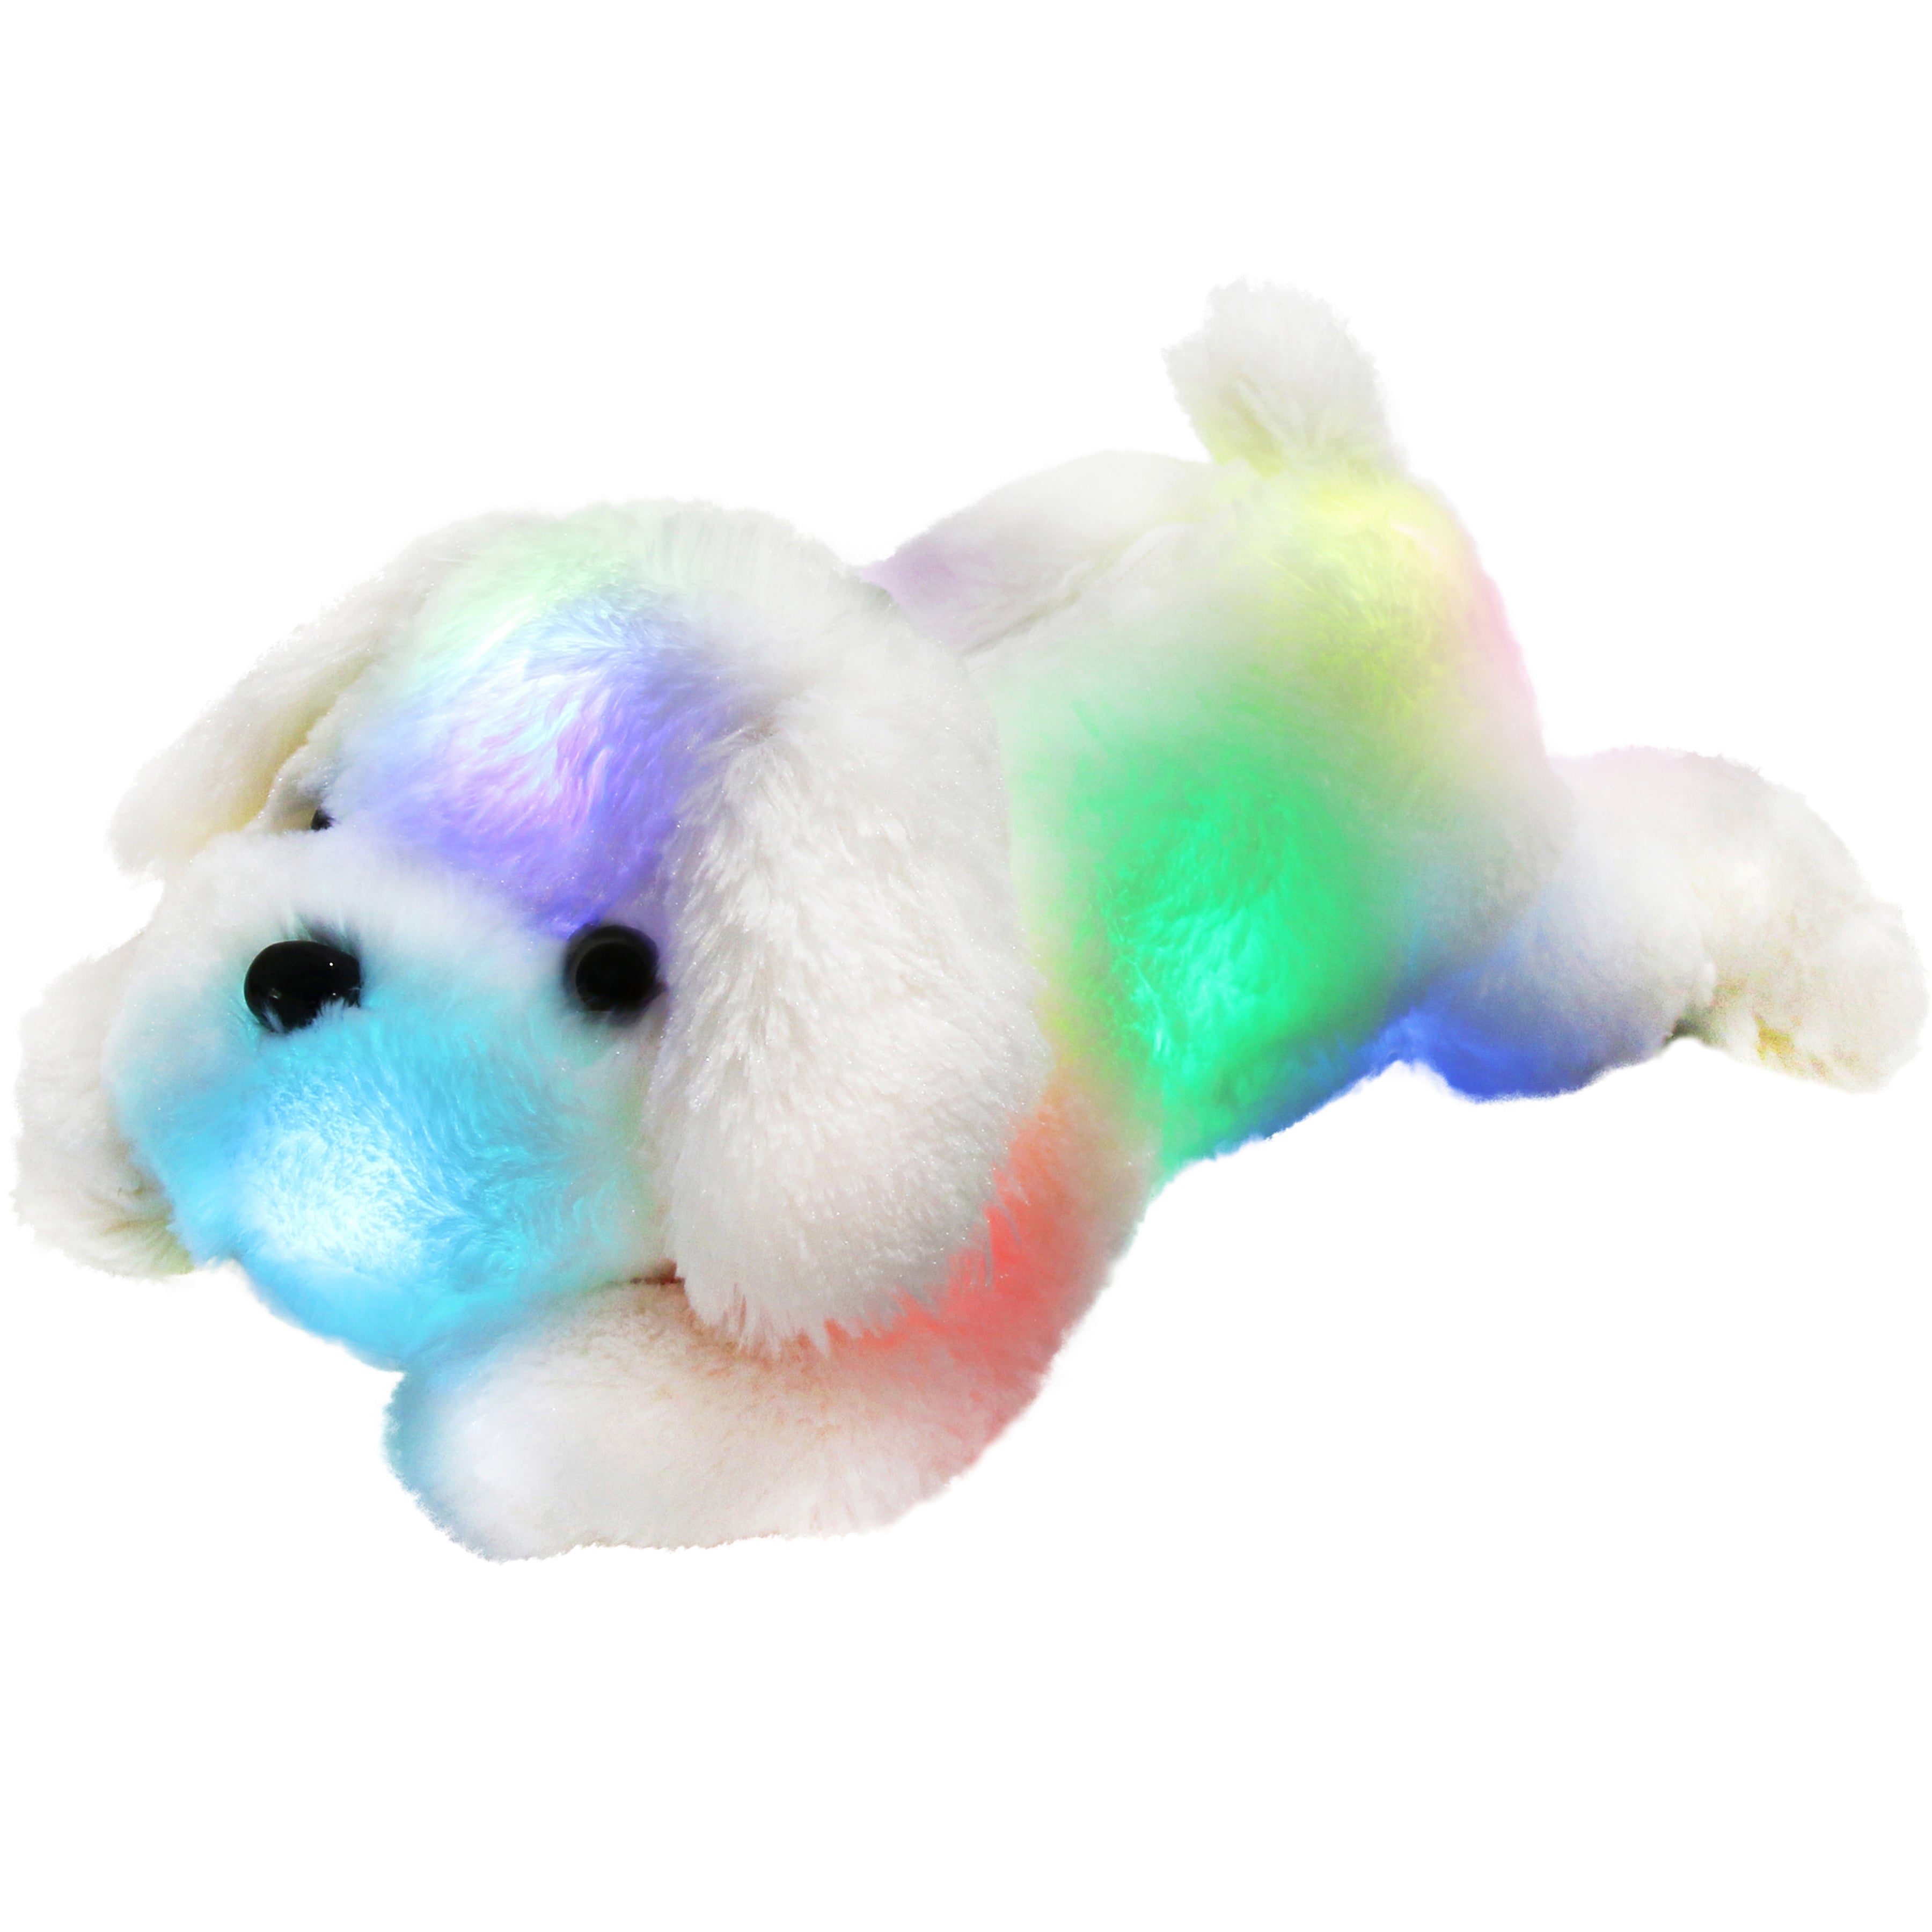 night light up puppy LED stuffed dogs, 18-Inch | Bstaofy - Glow Guards